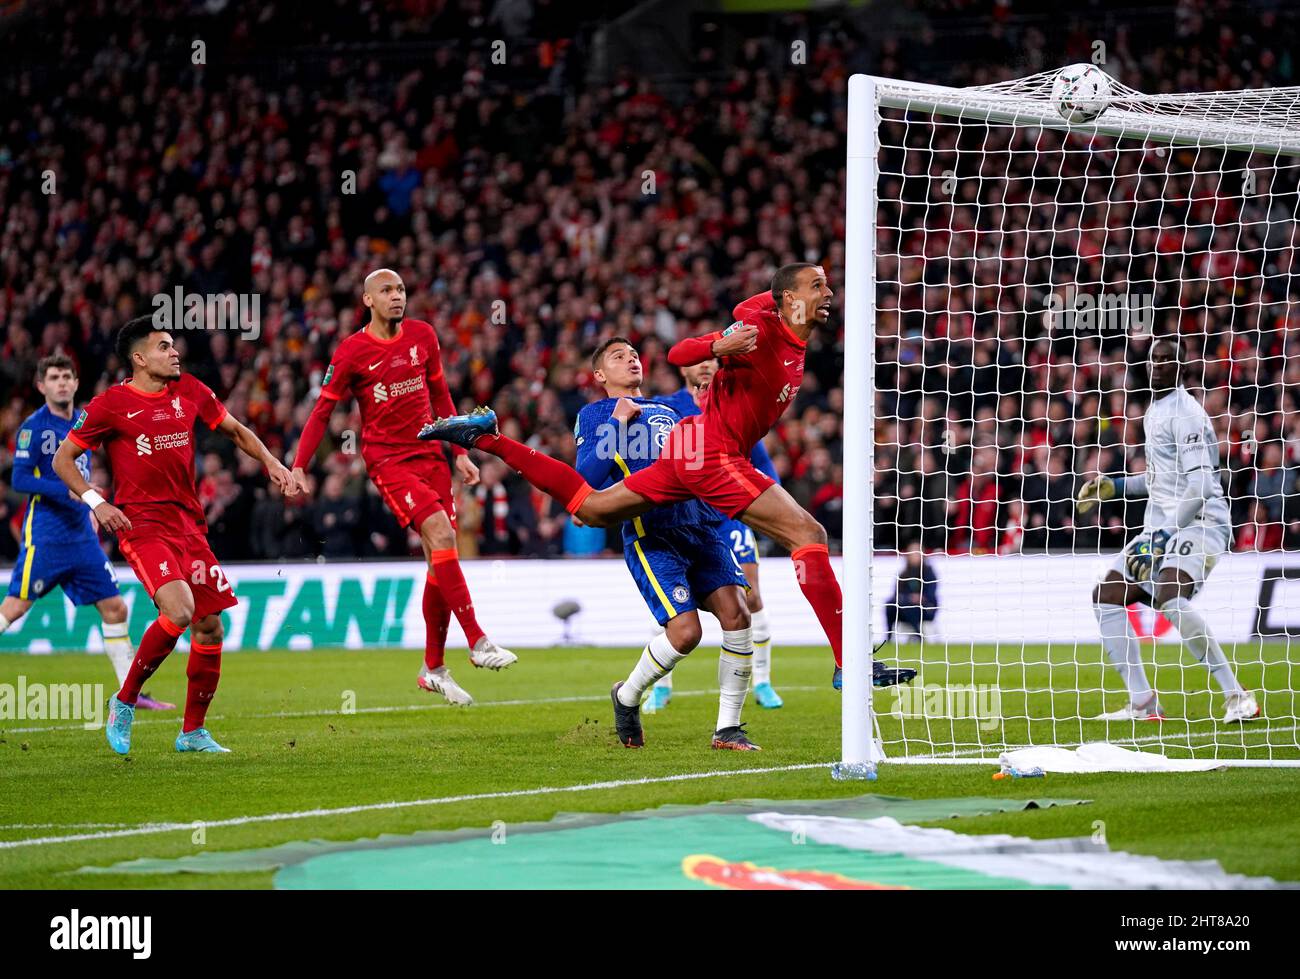 Liverpool's Joel Matip scores a goal before it is later disallowed during the Carabao Cup final at Wembley Stadium, London. Picture date: Sunday 27th February, 2022. Stock Photo